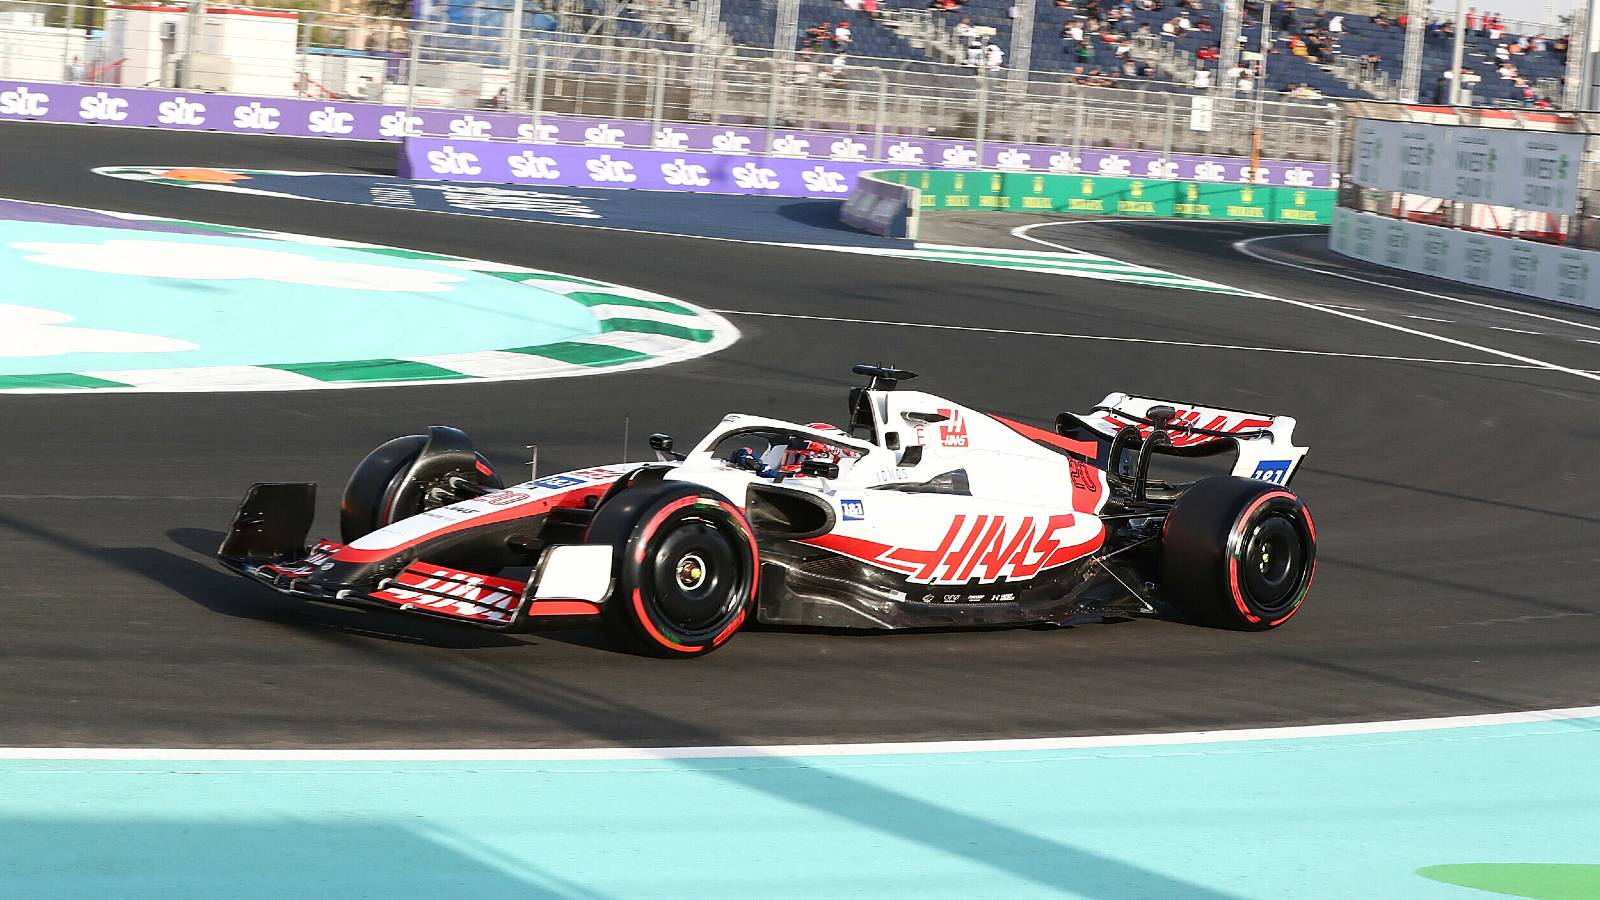 Kevin Magnussen, Haas, on-track in Saudi Arabia. March 2022.